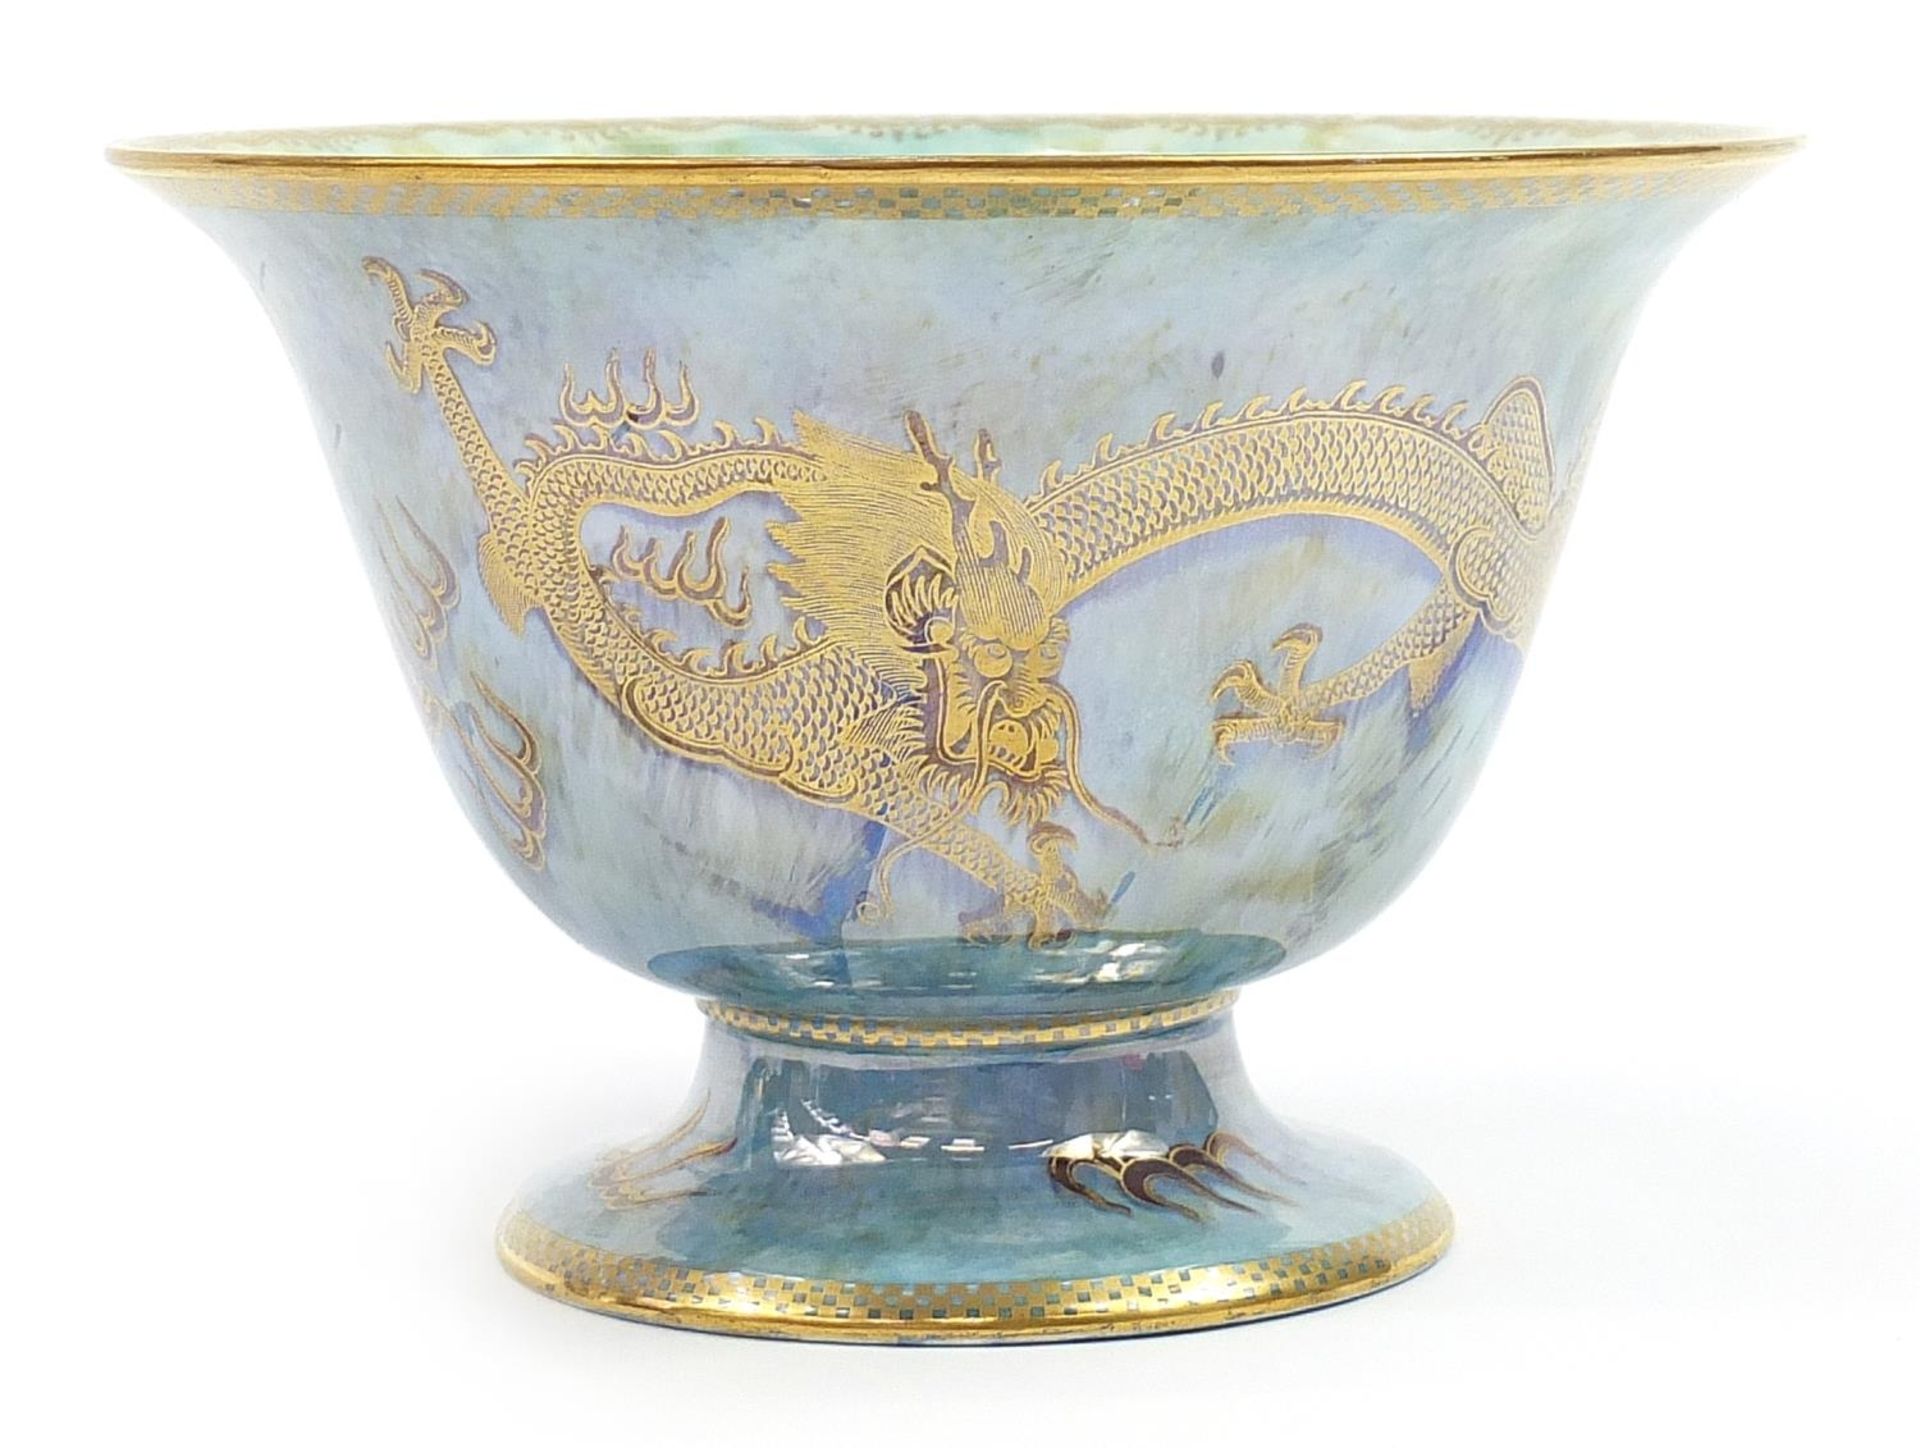 Wedgwood Fairyland lustre footed bowl hand painted with dragons, inscribed Z4829 to the base, 22cm